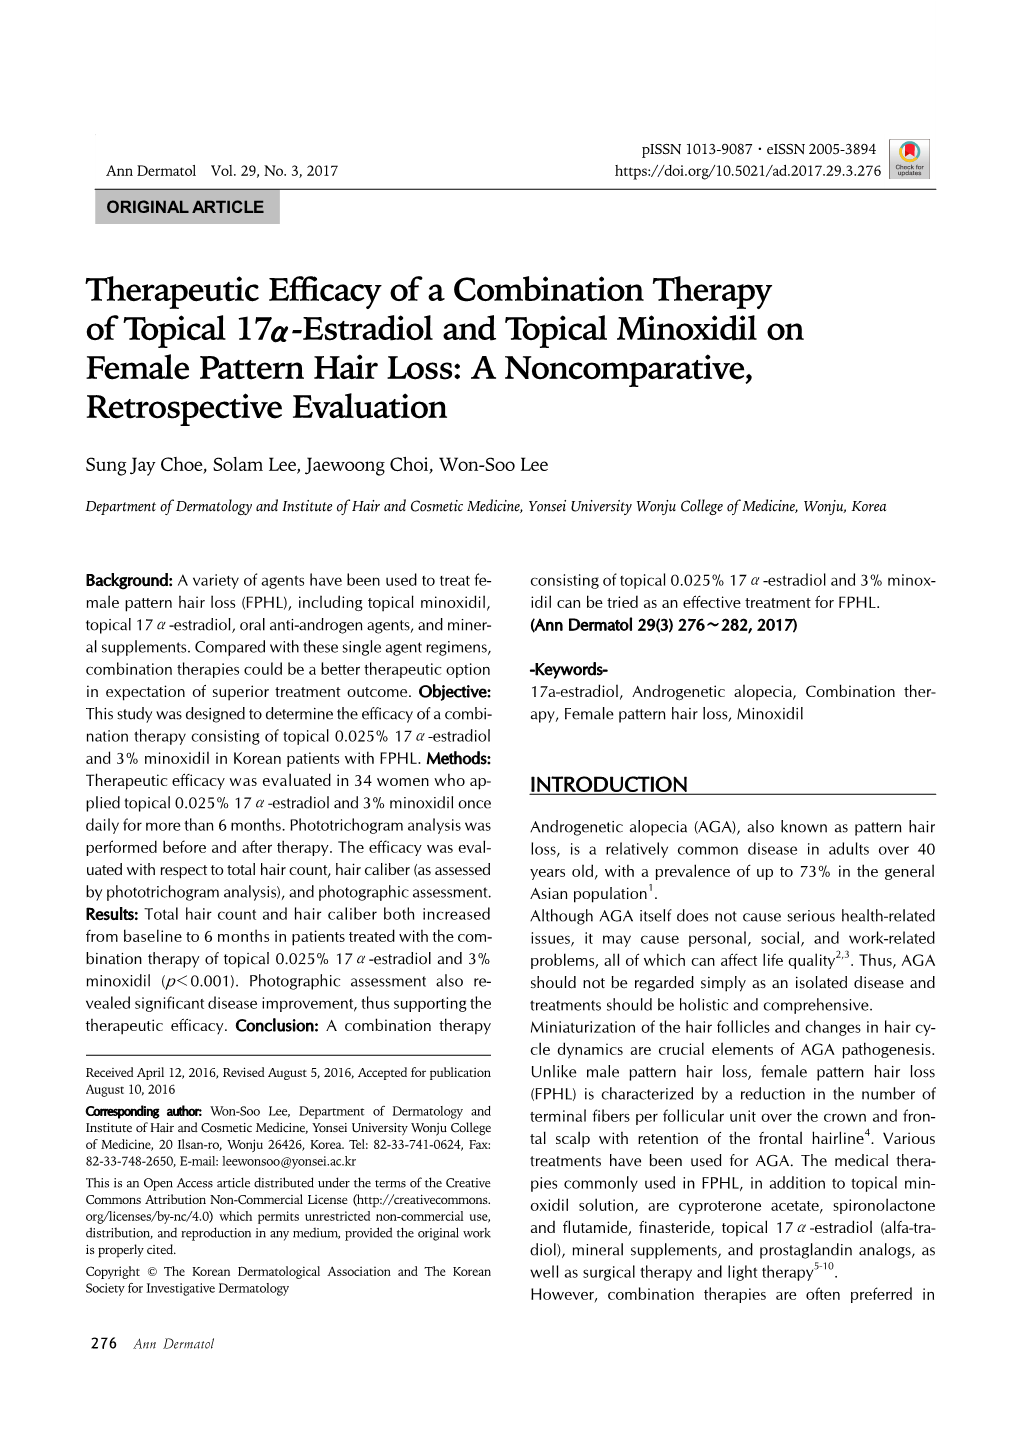 Therapeutic Efficacy of a Combination Therapy of Topical 17Α-Estradiol and Topical Minoxidil on Female Pattern Hair Loss: a Noncomparative, Retrospective Evaluation